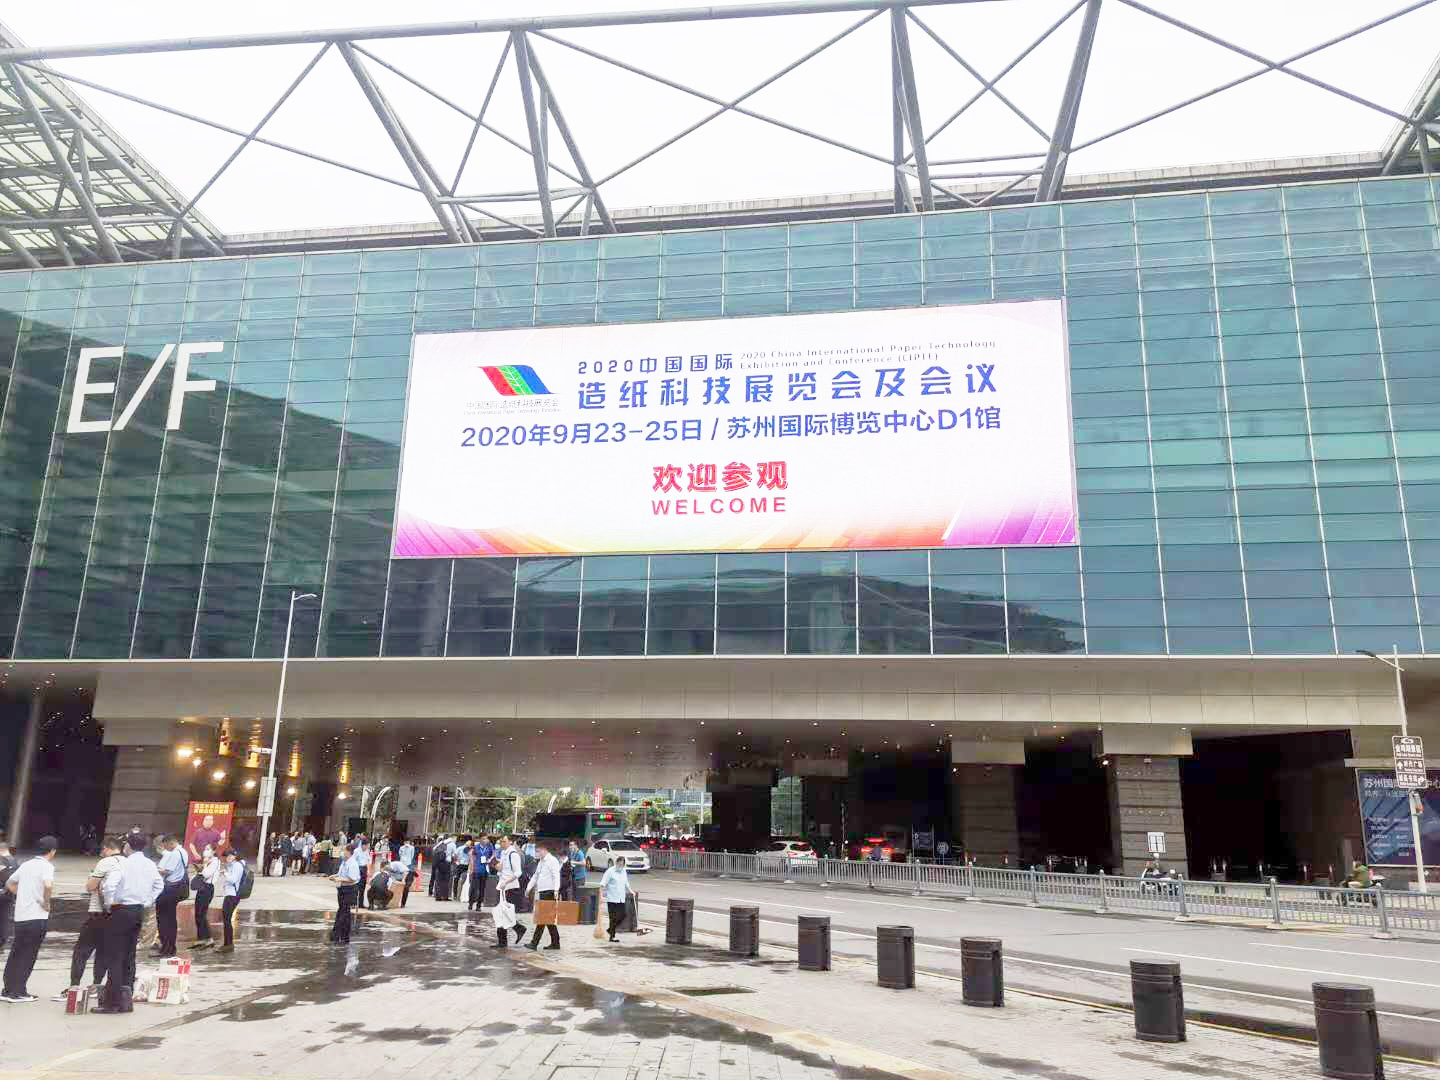 2020 China International Paper Technology Exhibition and Conference